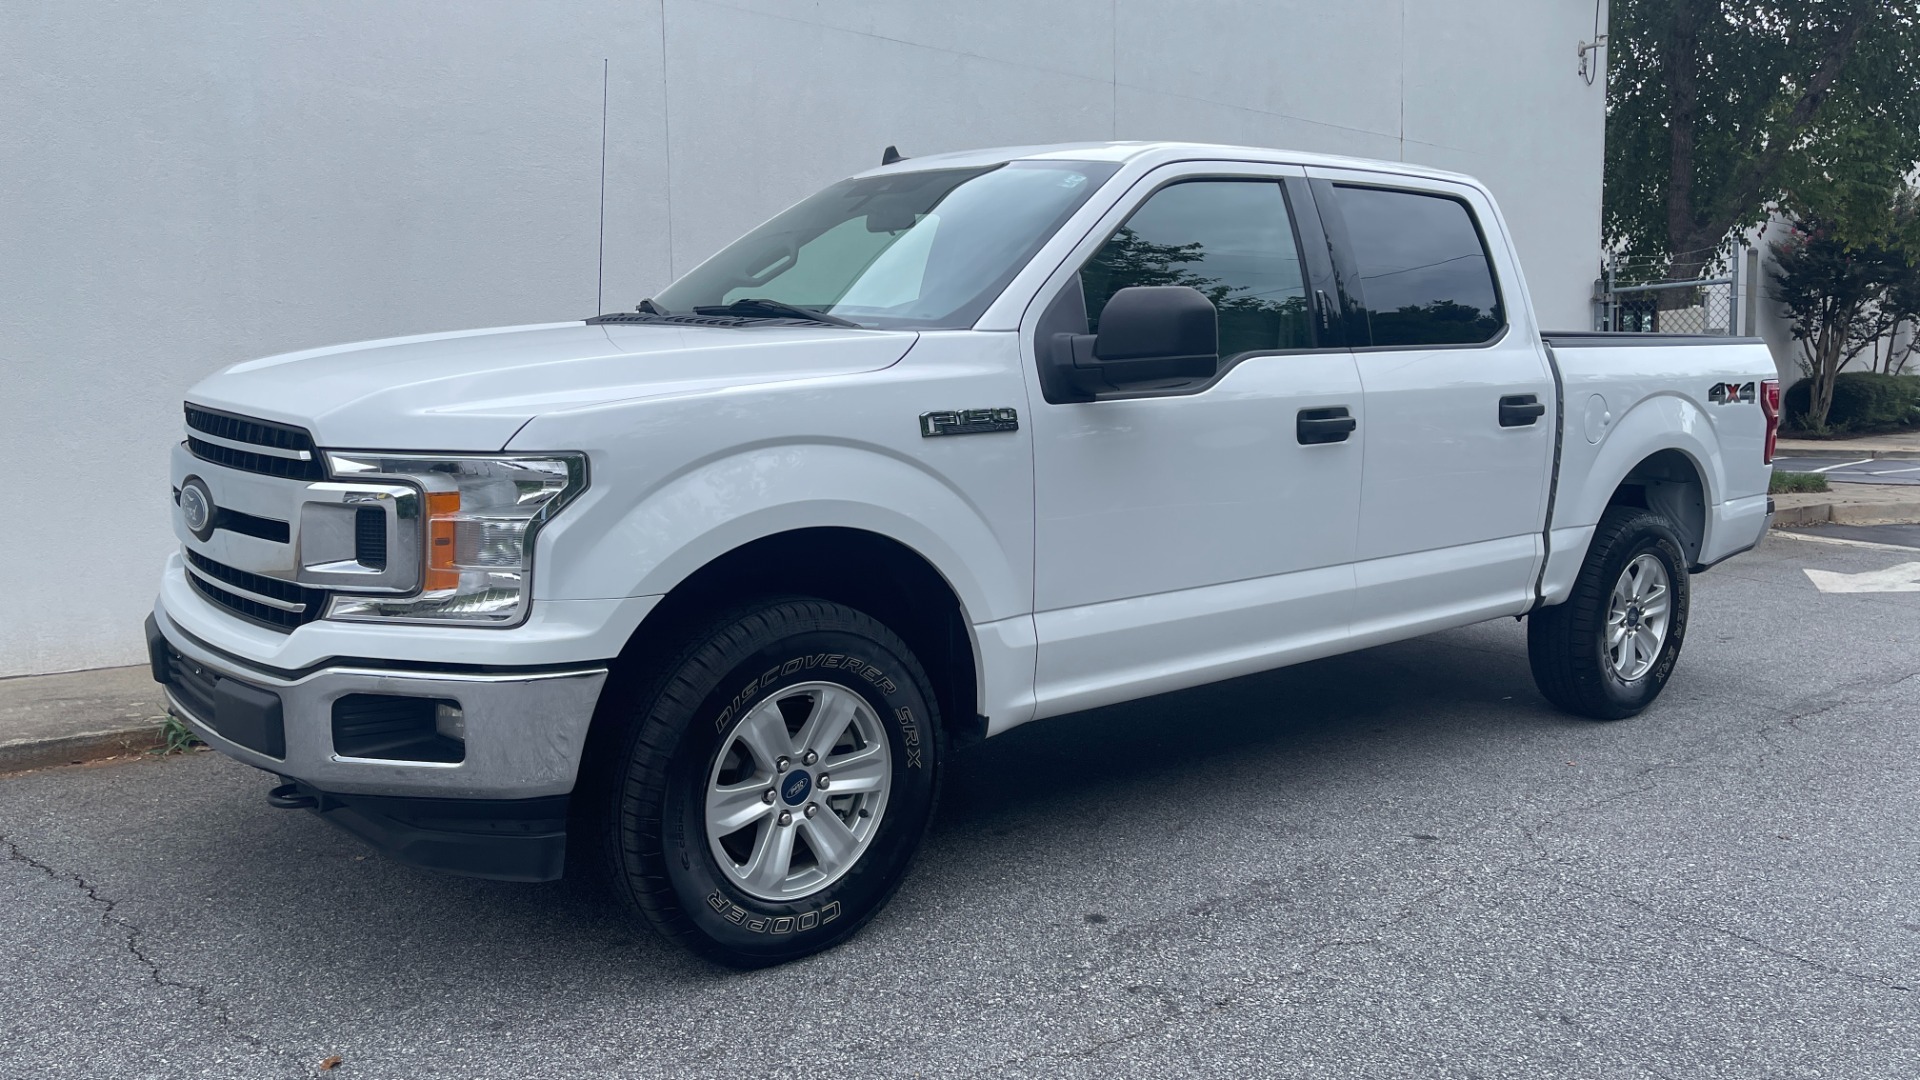 Used 2020 Ford F-150 XLT / 5.0L V8 / CREW CAB 4X4 / 17IN ALUMINUM WHEELS / CLOTH SEATS for sale Sold at Formula Imports in Charlotte NC 28227 1